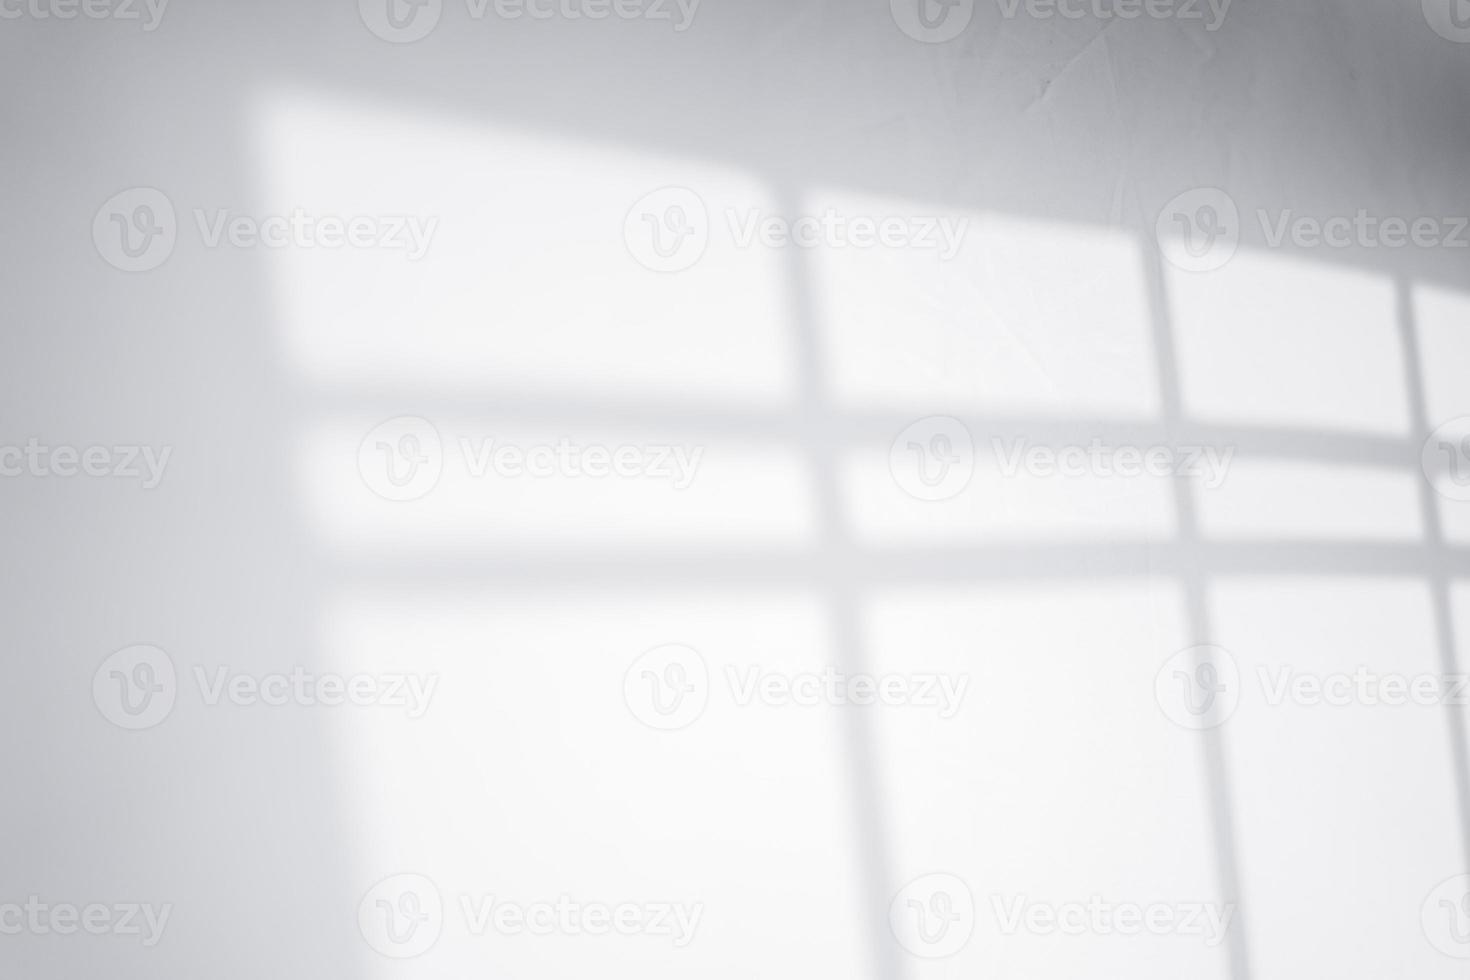 window shadow for overlay background. minimalist and elegant photo effects